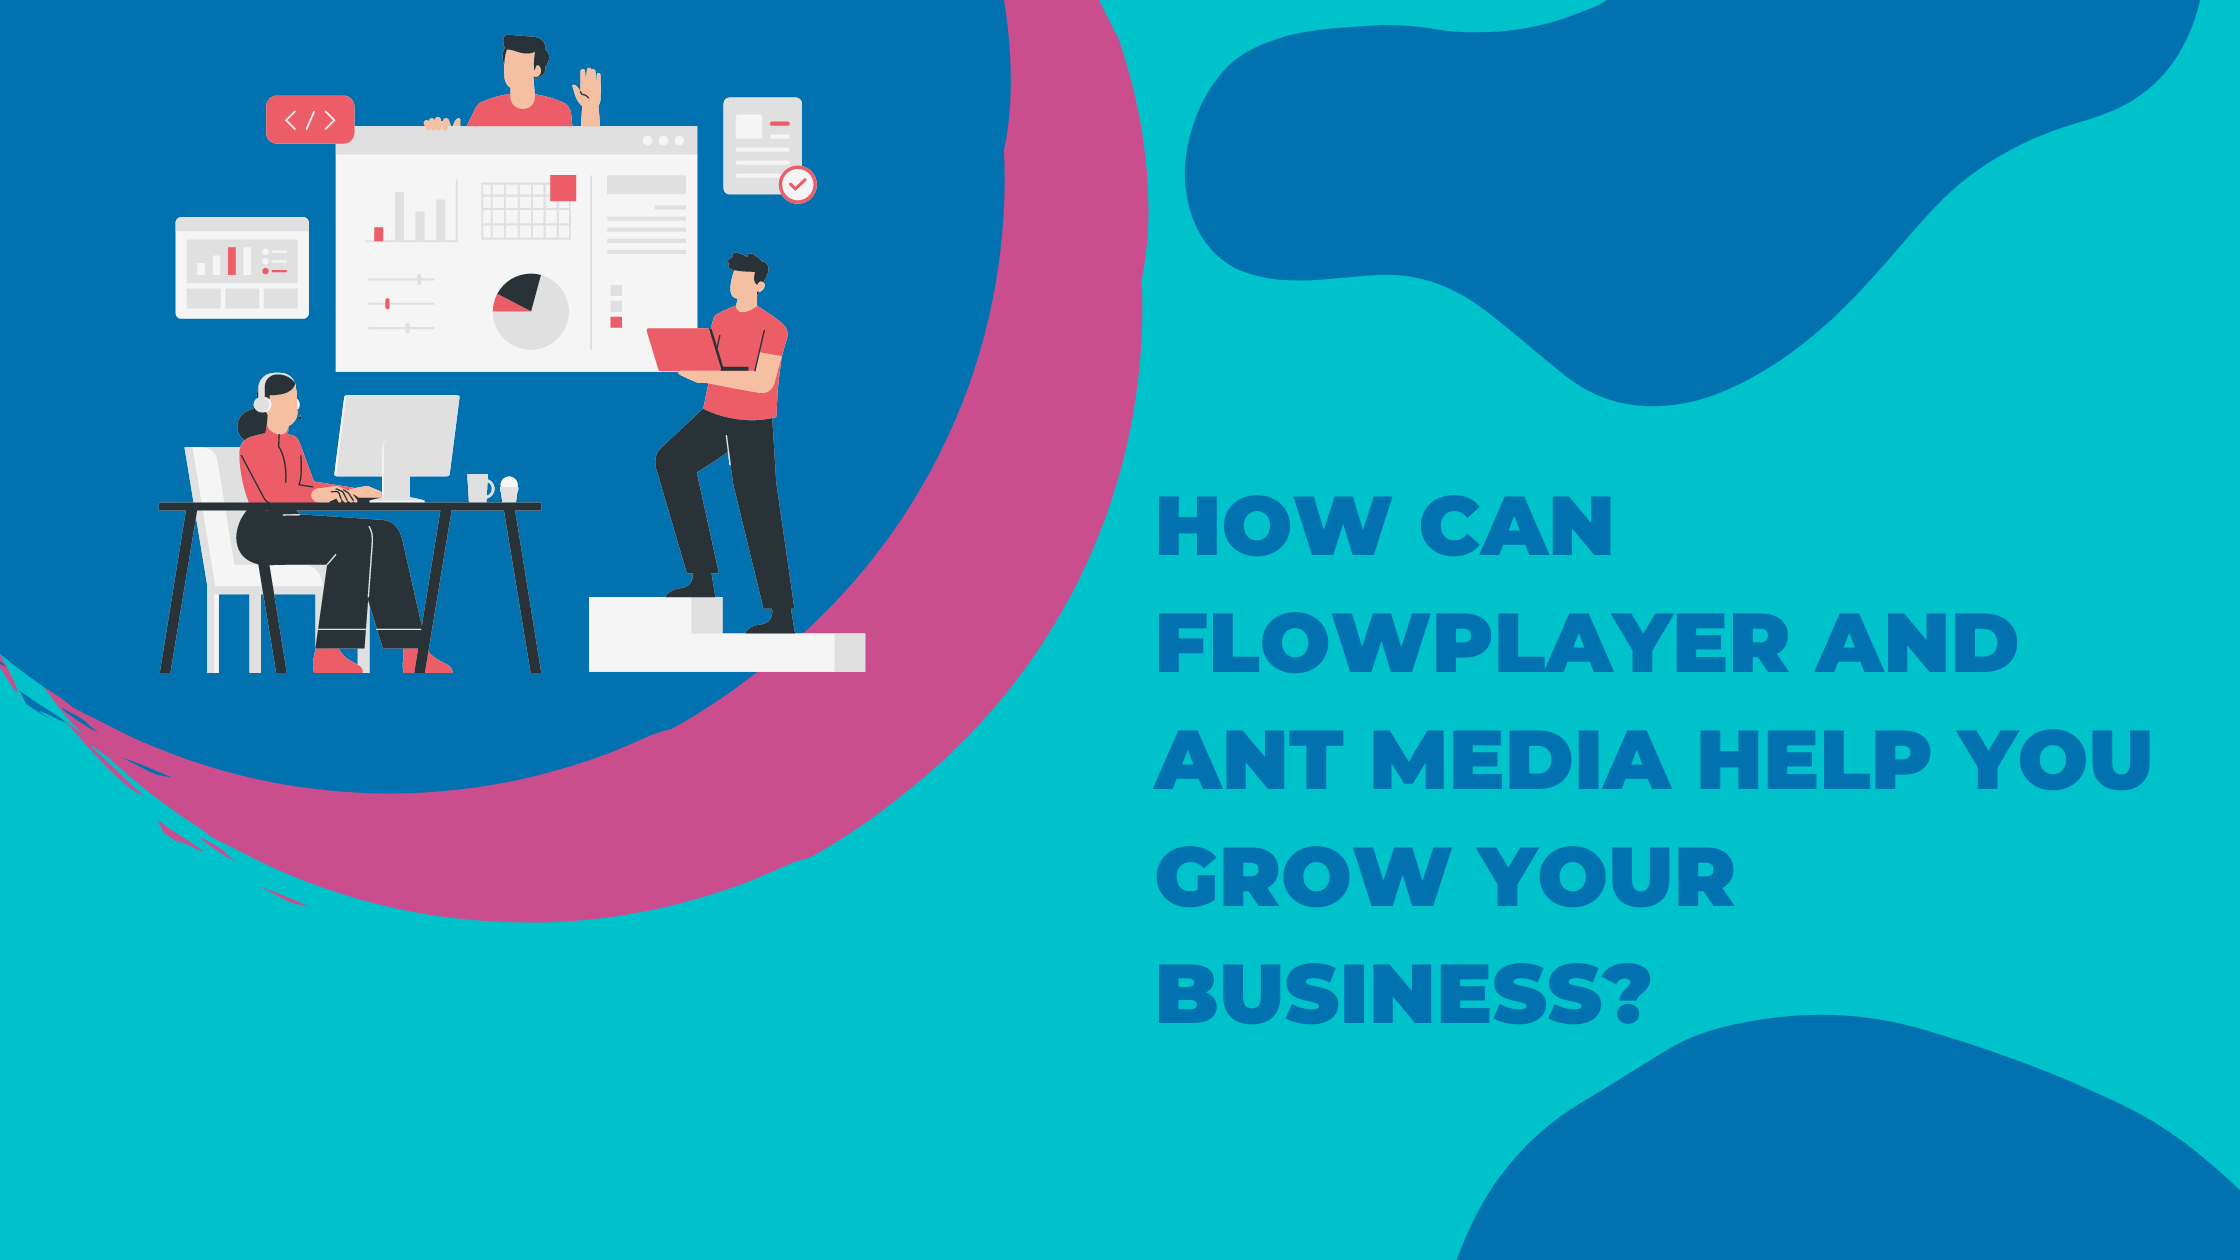 How can Flowplayer and Ant Media help you grow your business?